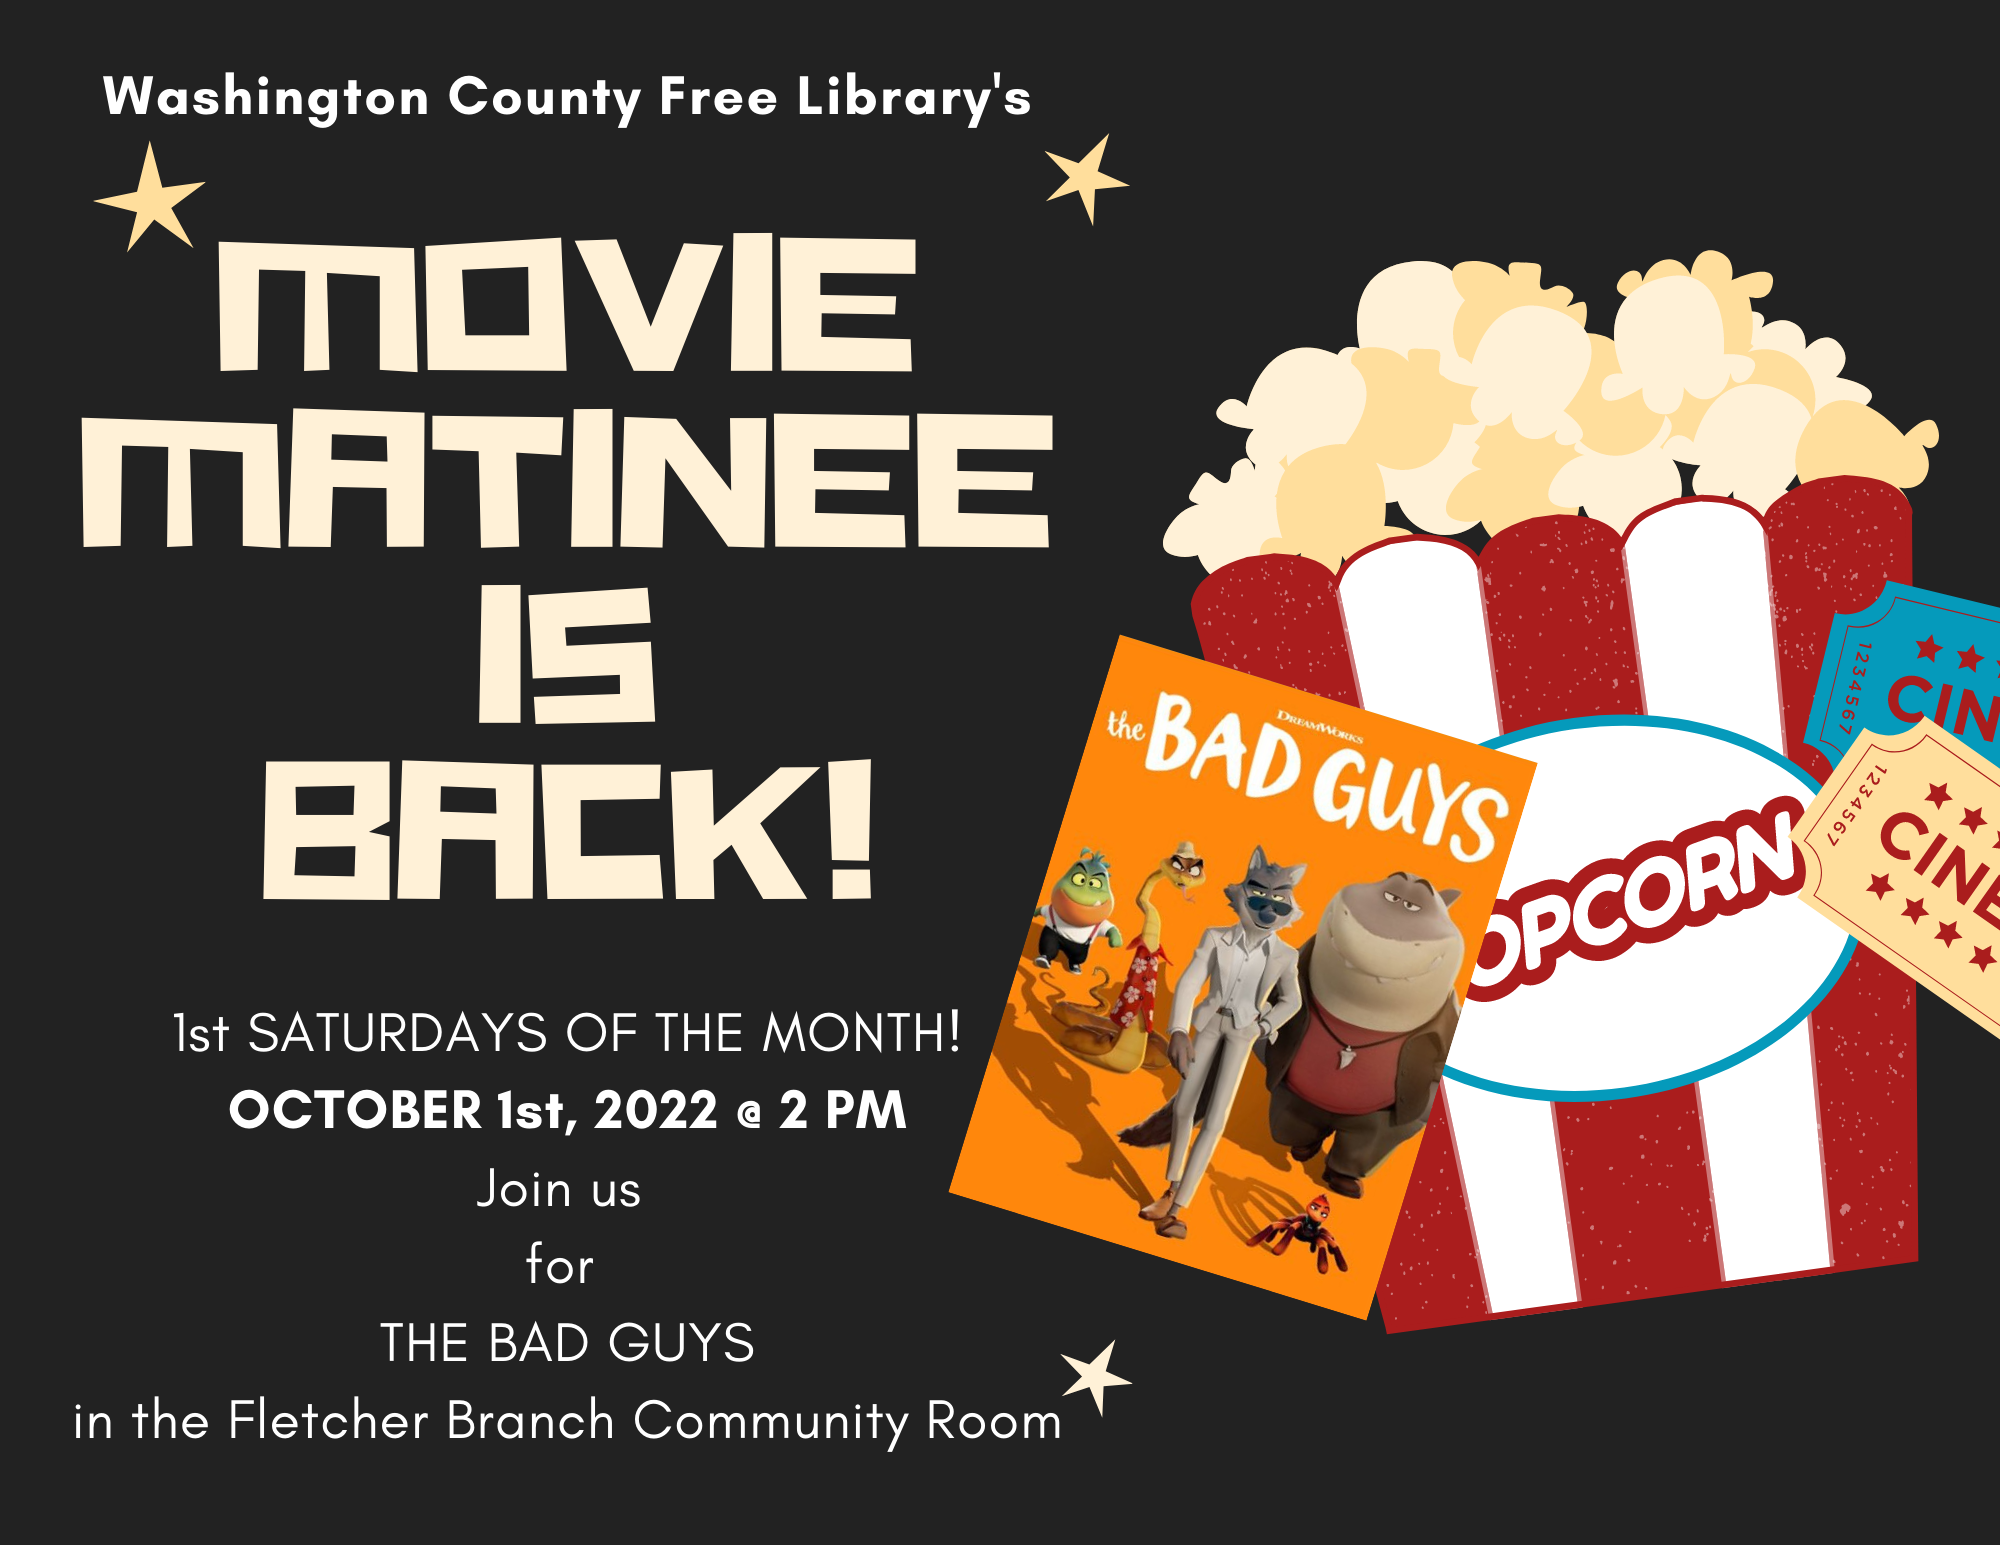 Movie Matinee is Back!